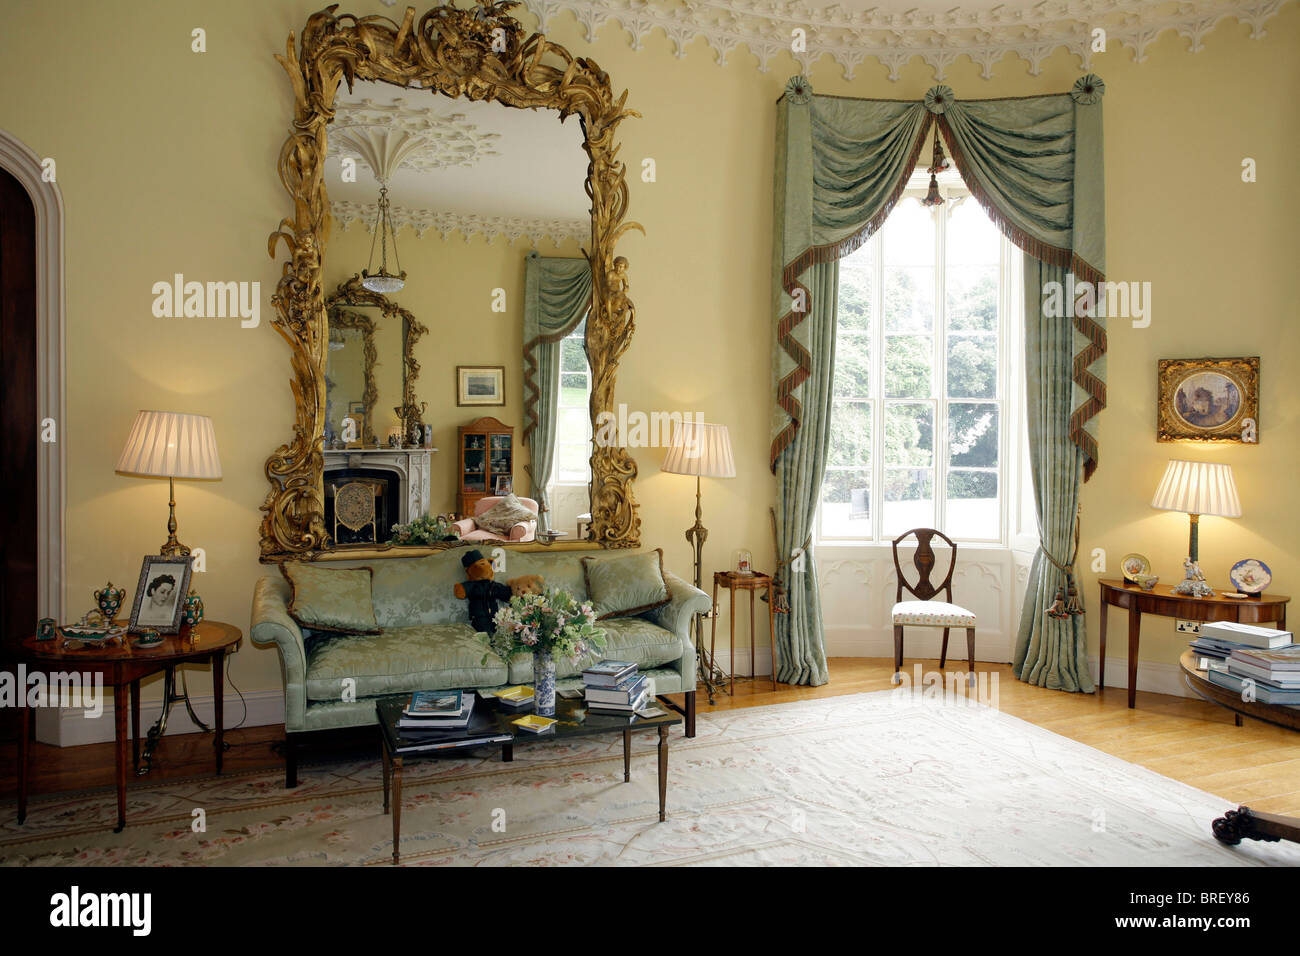 Living room, Prideaux Place Manor, Padstow, Cornwall, South England, Great Britain, Europe Stock Photo